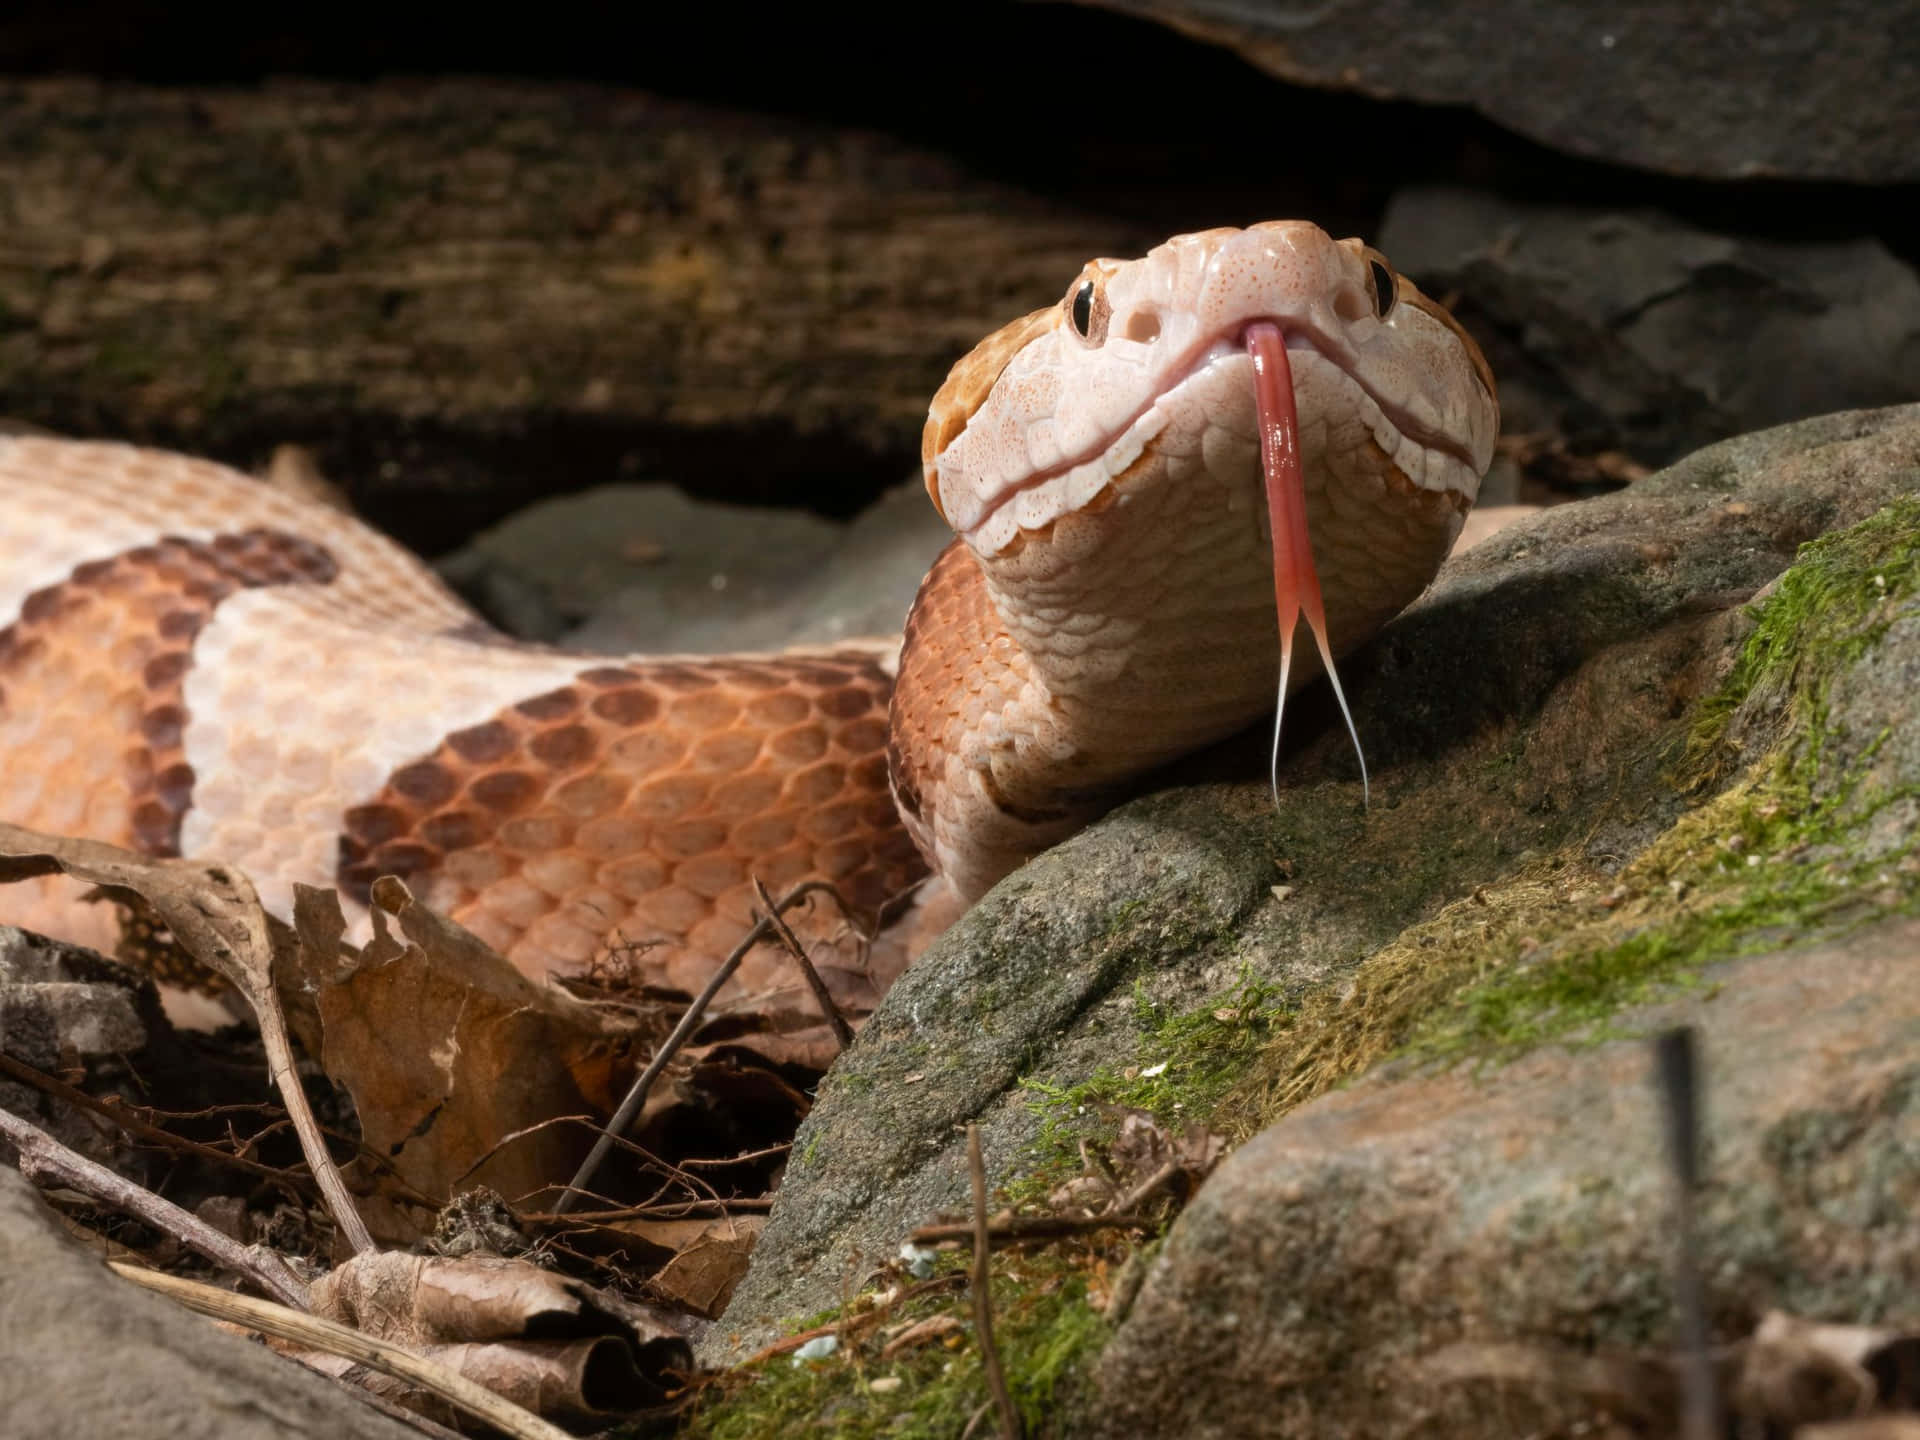 A Snake Is Sitting On A Rock With Its Tongue Out